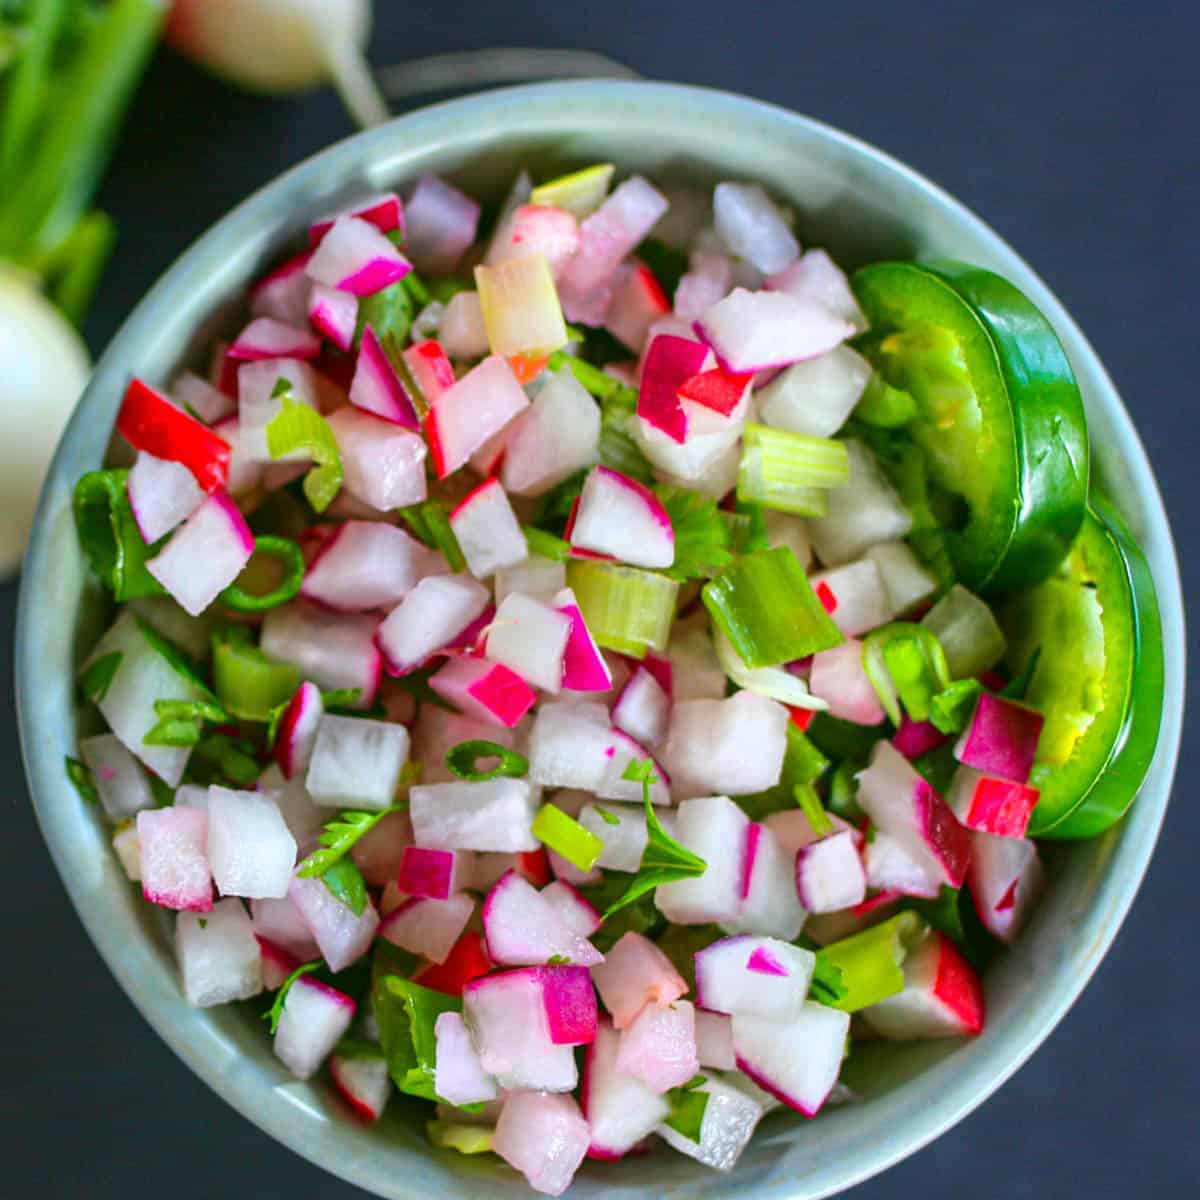 Radish salsa and jalapeno slices in a grey bowl with a dark grey background.